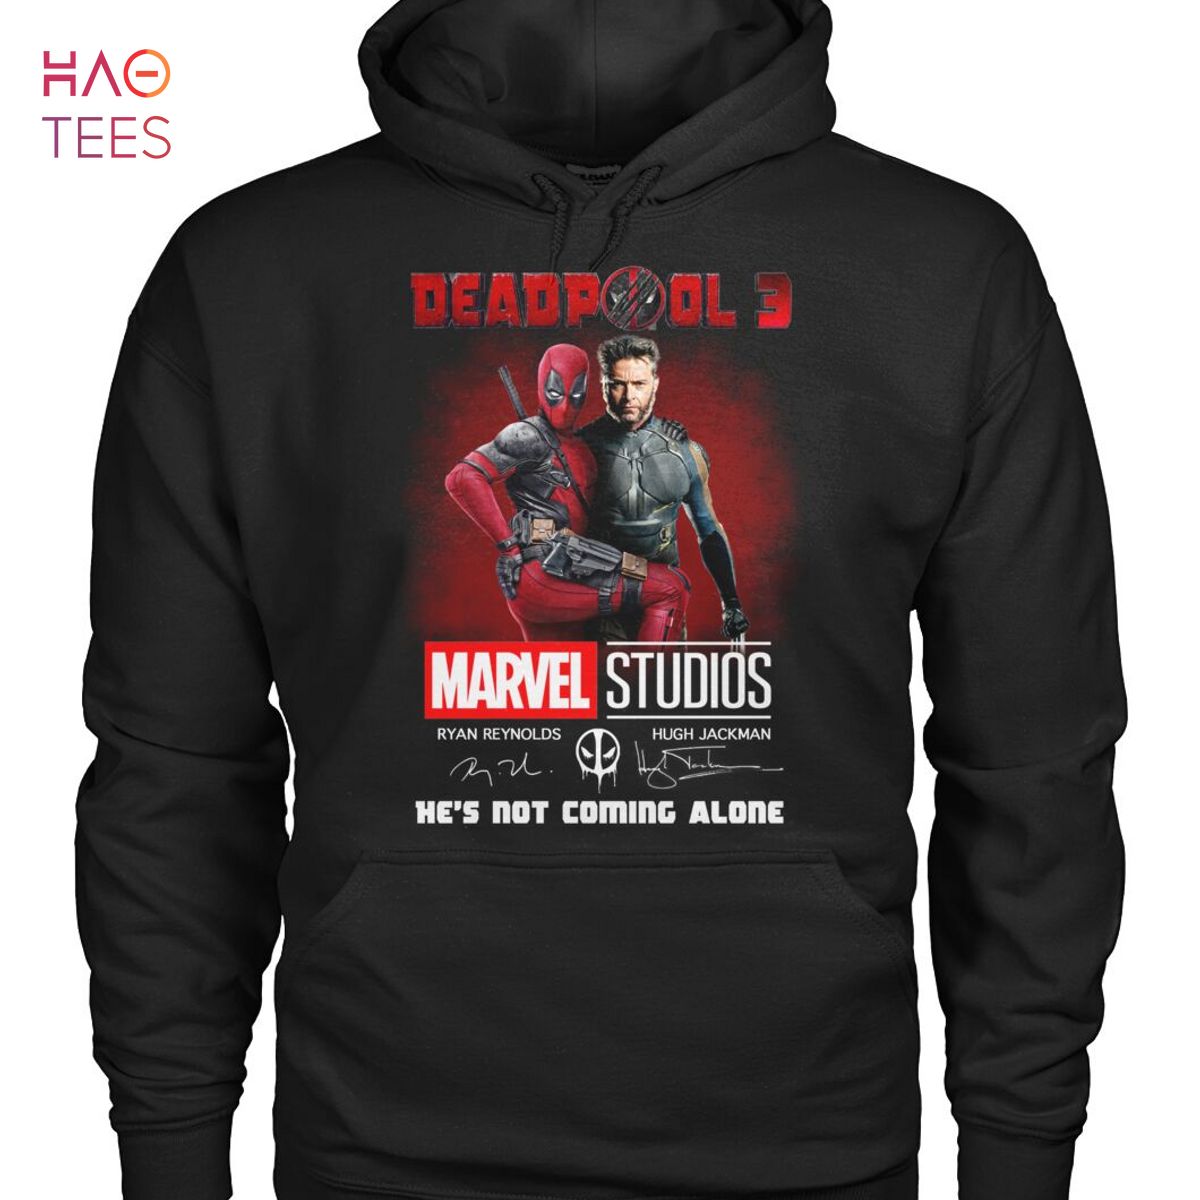 Deapool 3 Marvel Studiod He 'S Not Coming Alone Shirt